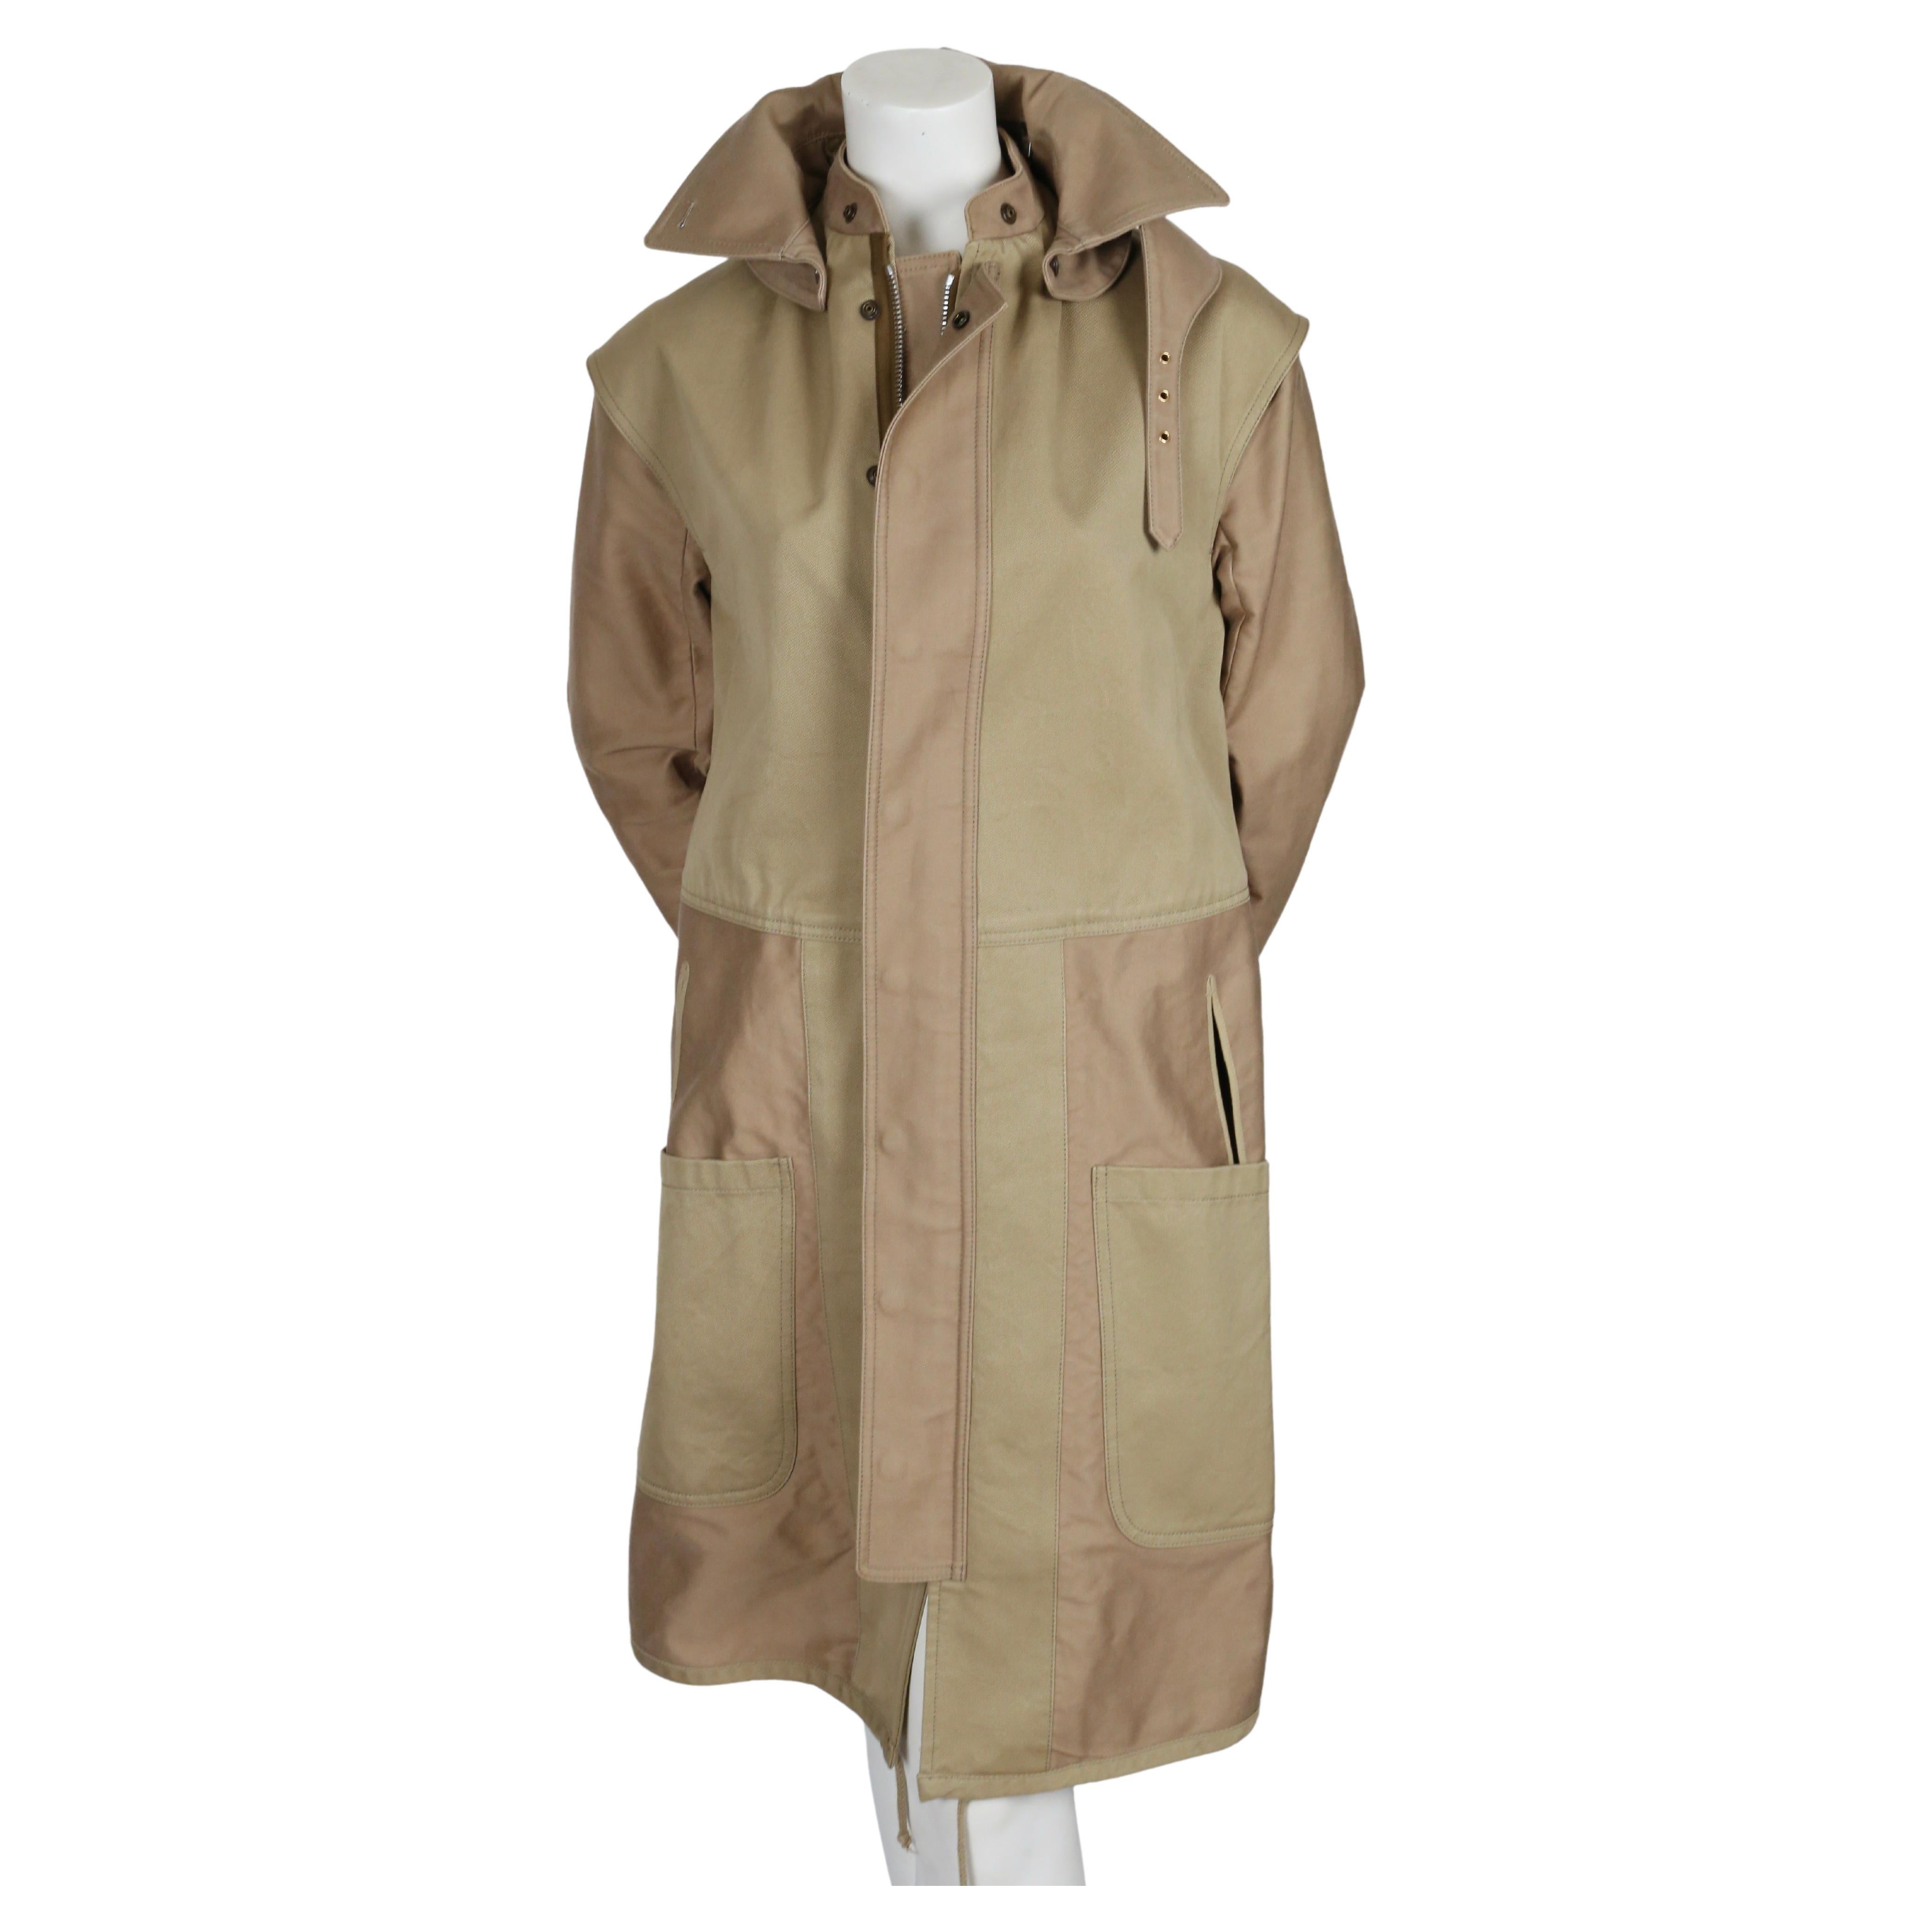 Very rare, khaki cotton oversized coat designed by Phoebe Philo for Celine dating to resort of 2010. Labeled a French size 36, however it fits oversized. Approximate measurements: dropped shoulder 19